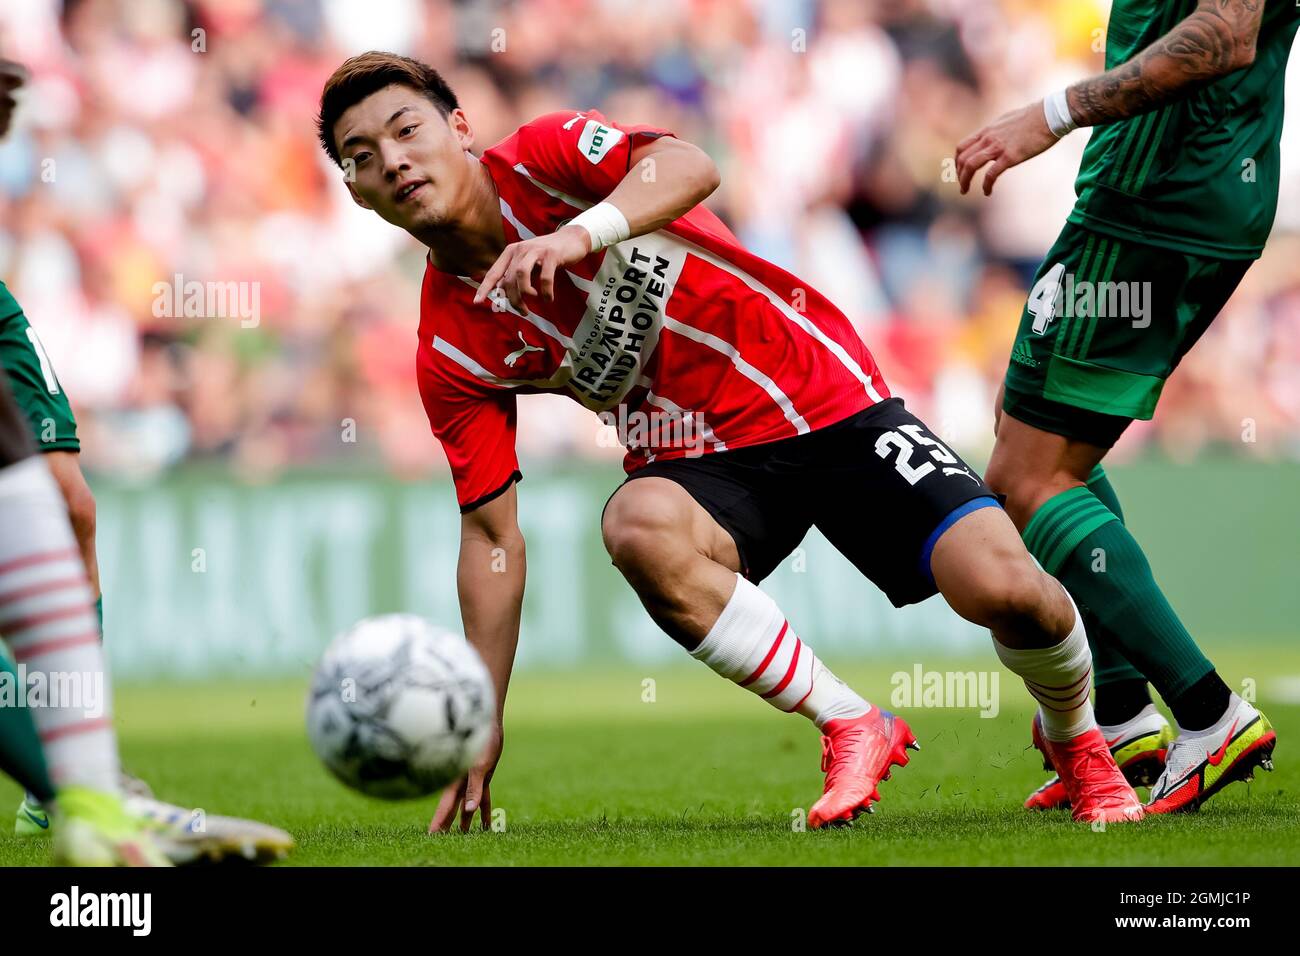 EINDHOVEN, NETHERLANDS - SEPTEMBER 19: Ritsu Doan of PSV during the Dutch  Eredivisie match between PSV and Feyenoord at the Philips Stadion on  September 19, 2021 in Eindhoven, Netherlands (Photo by Broer